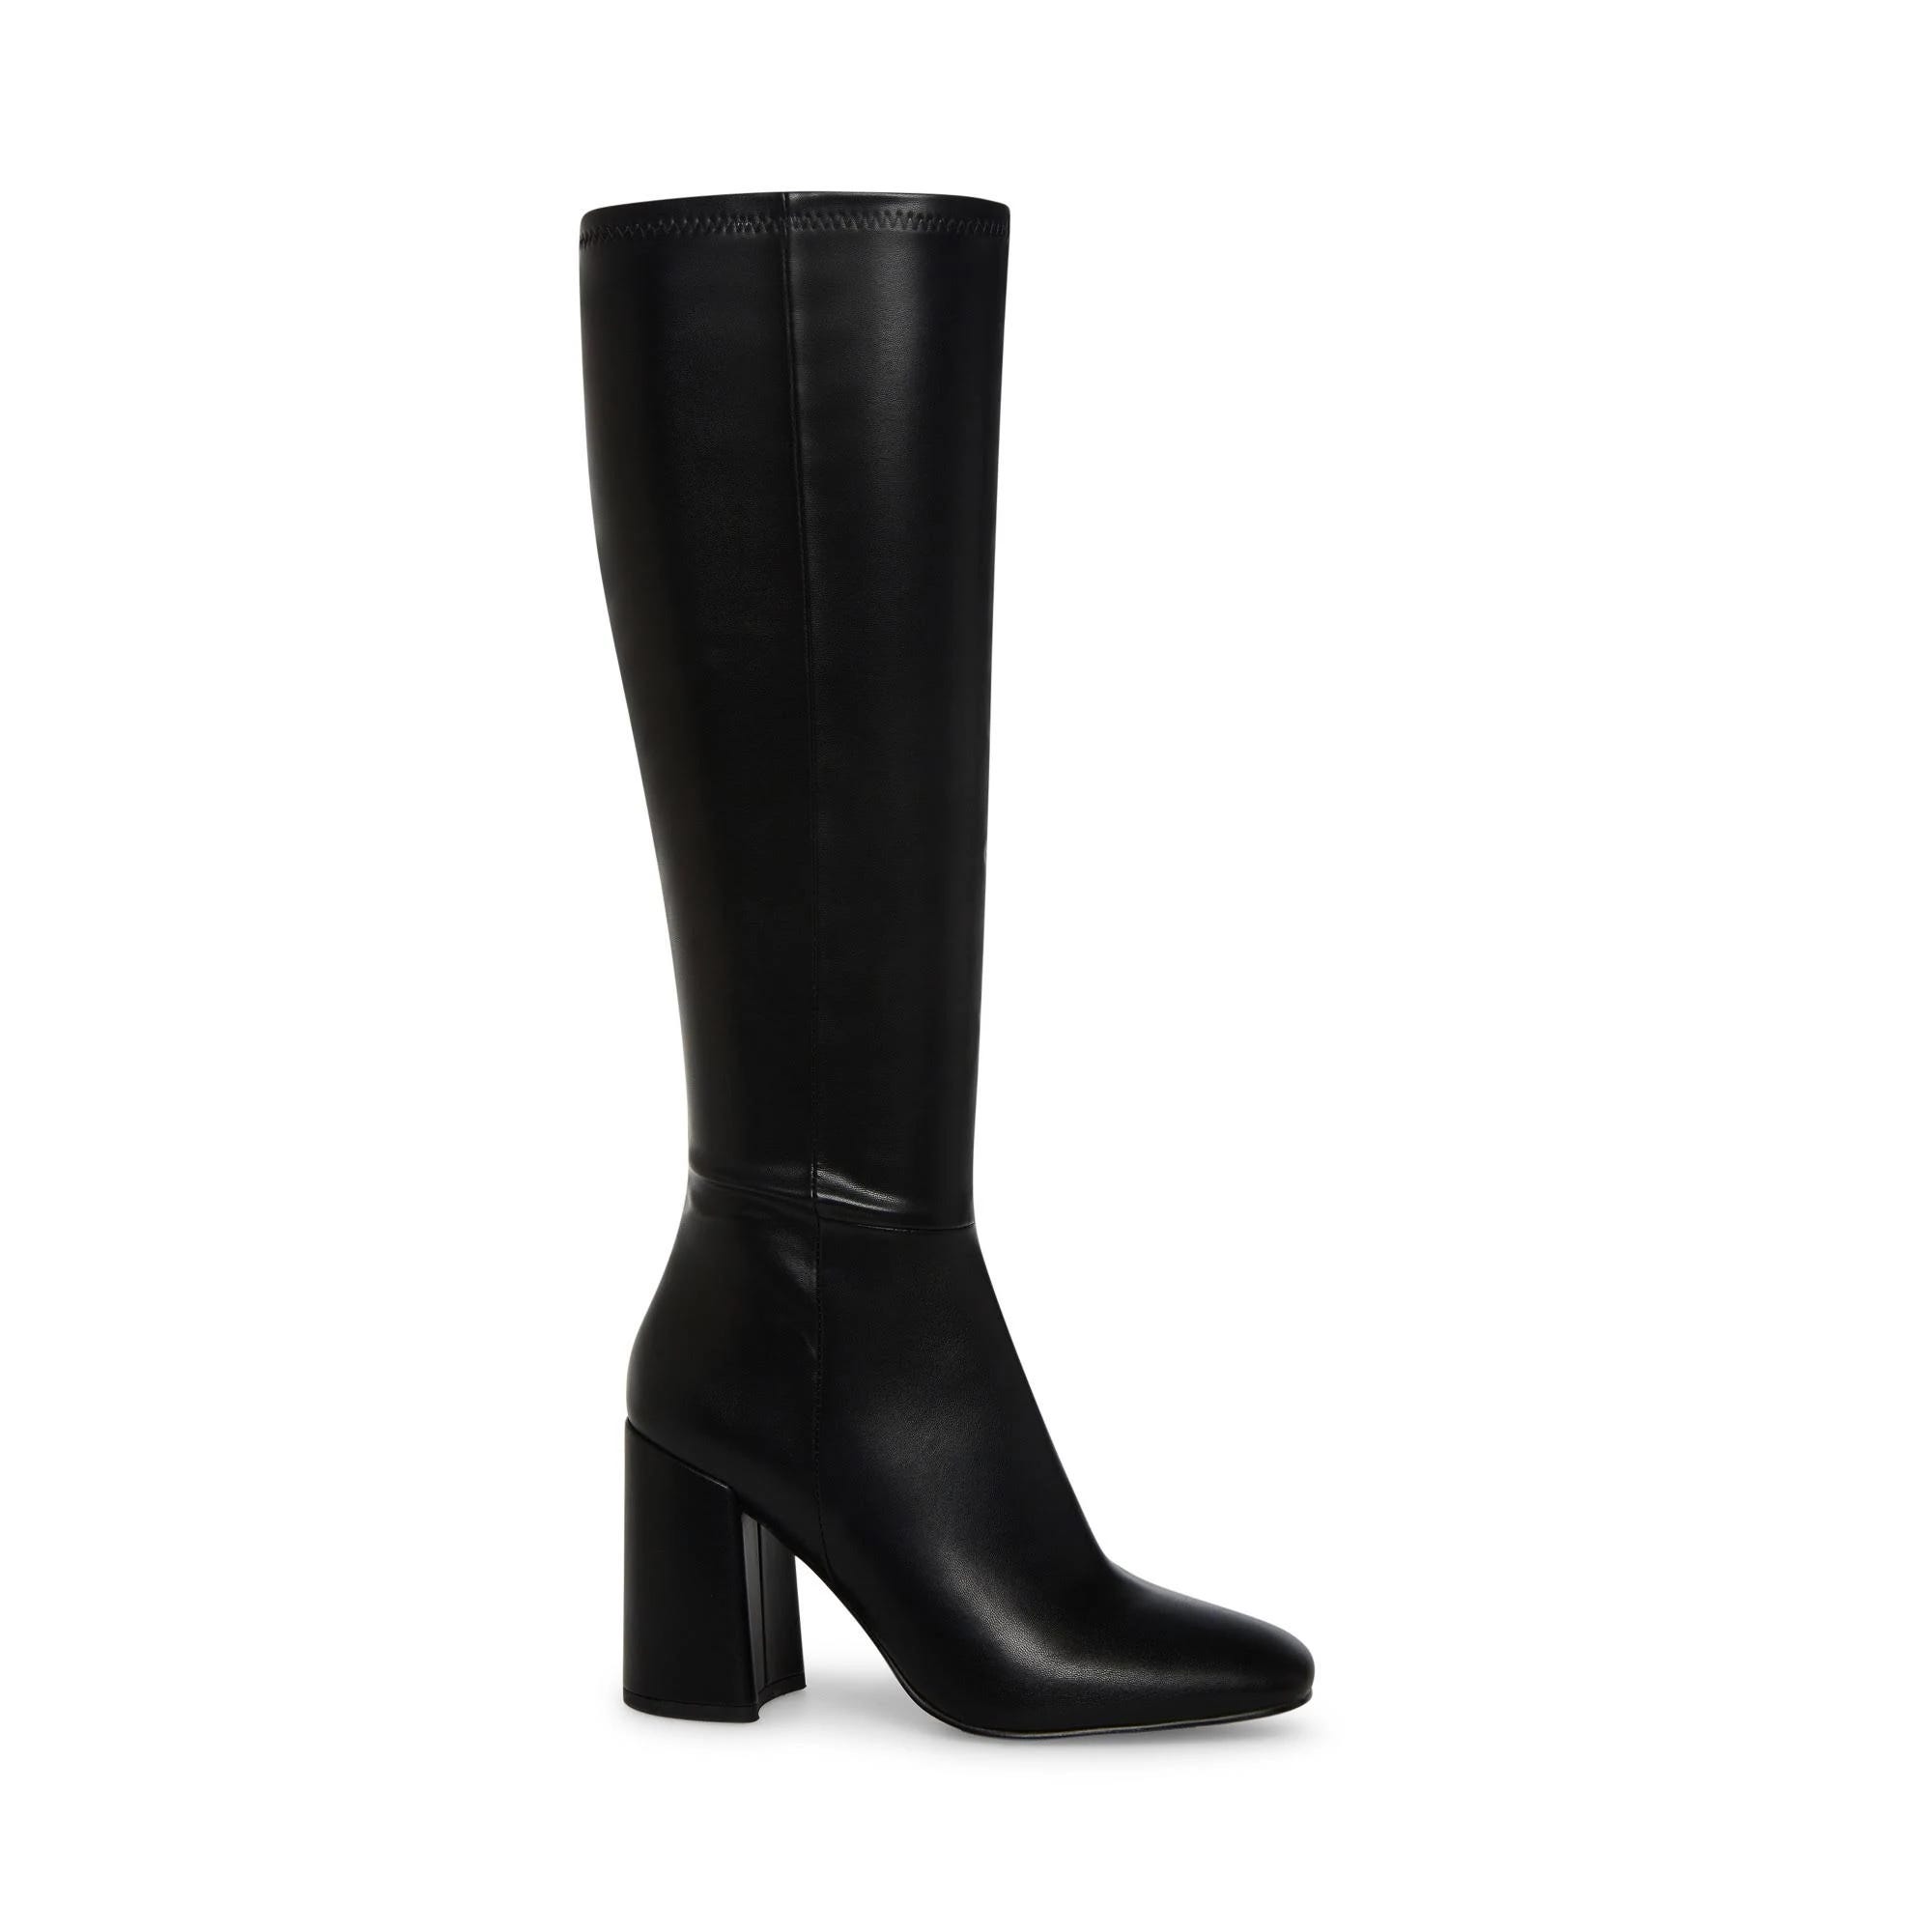 Black Knee-High Boot with Padded Footbed and Zipper Closure | Image